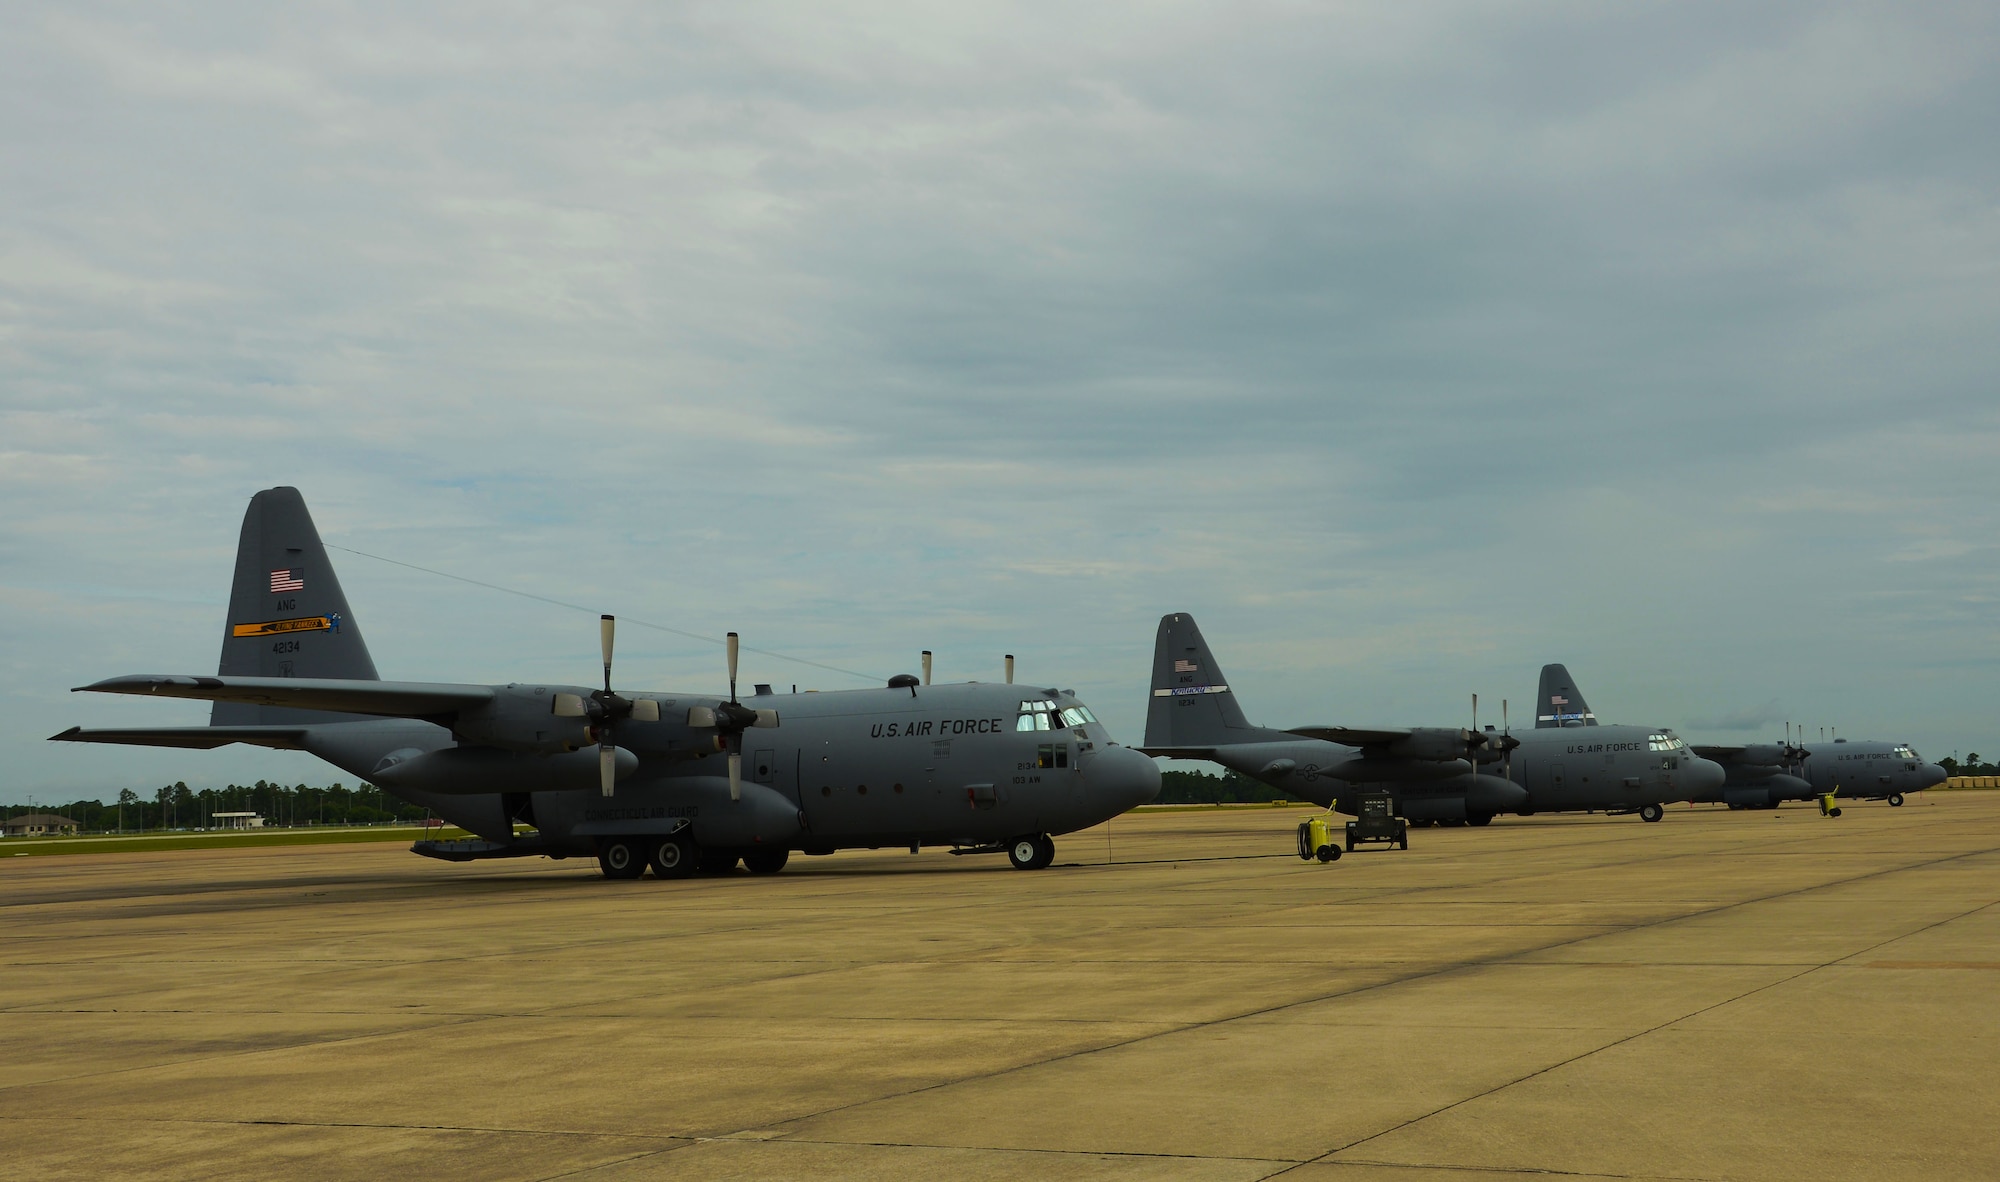 A C-130H aircraft, assigned to the 103rd Airlift Wing, is positioned next to C-130 aircraft from the Kentucky Air National Guard and will serve as a training tool for aircraft maintainers from both the 103rd Maintenance Squadron and the 123rd Maintenance Group while deployed to the Combat Readiness Training Center, Gulfport, Miss., June 25, 2014. (U.S. Air National Guard photo by Senior Airman Jennifer Pierce)